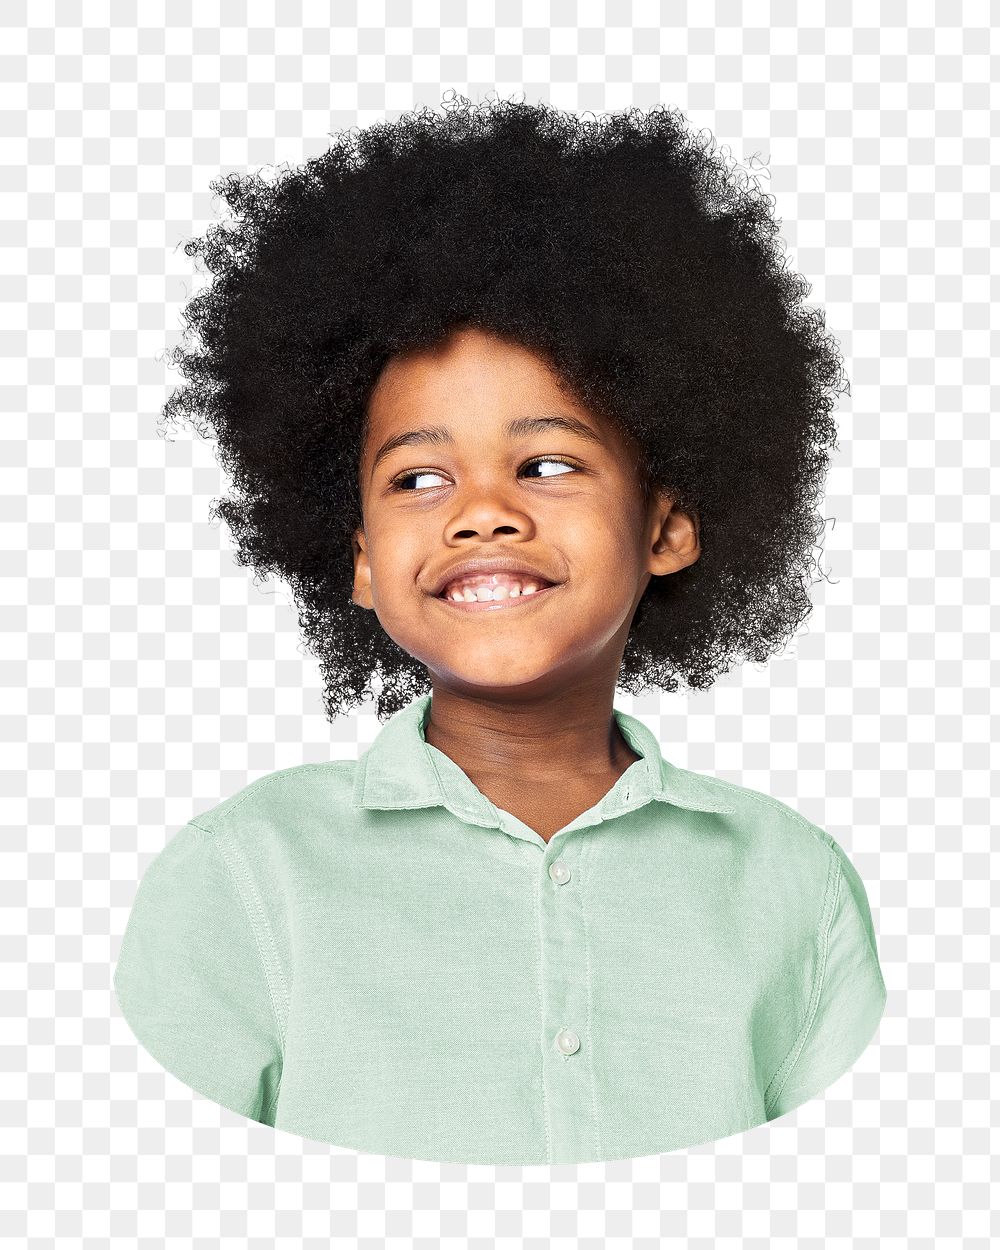 Child Afro Images | Free Photos, PNG Stickers, Wallpapers & Backgrounds -  rawpixel